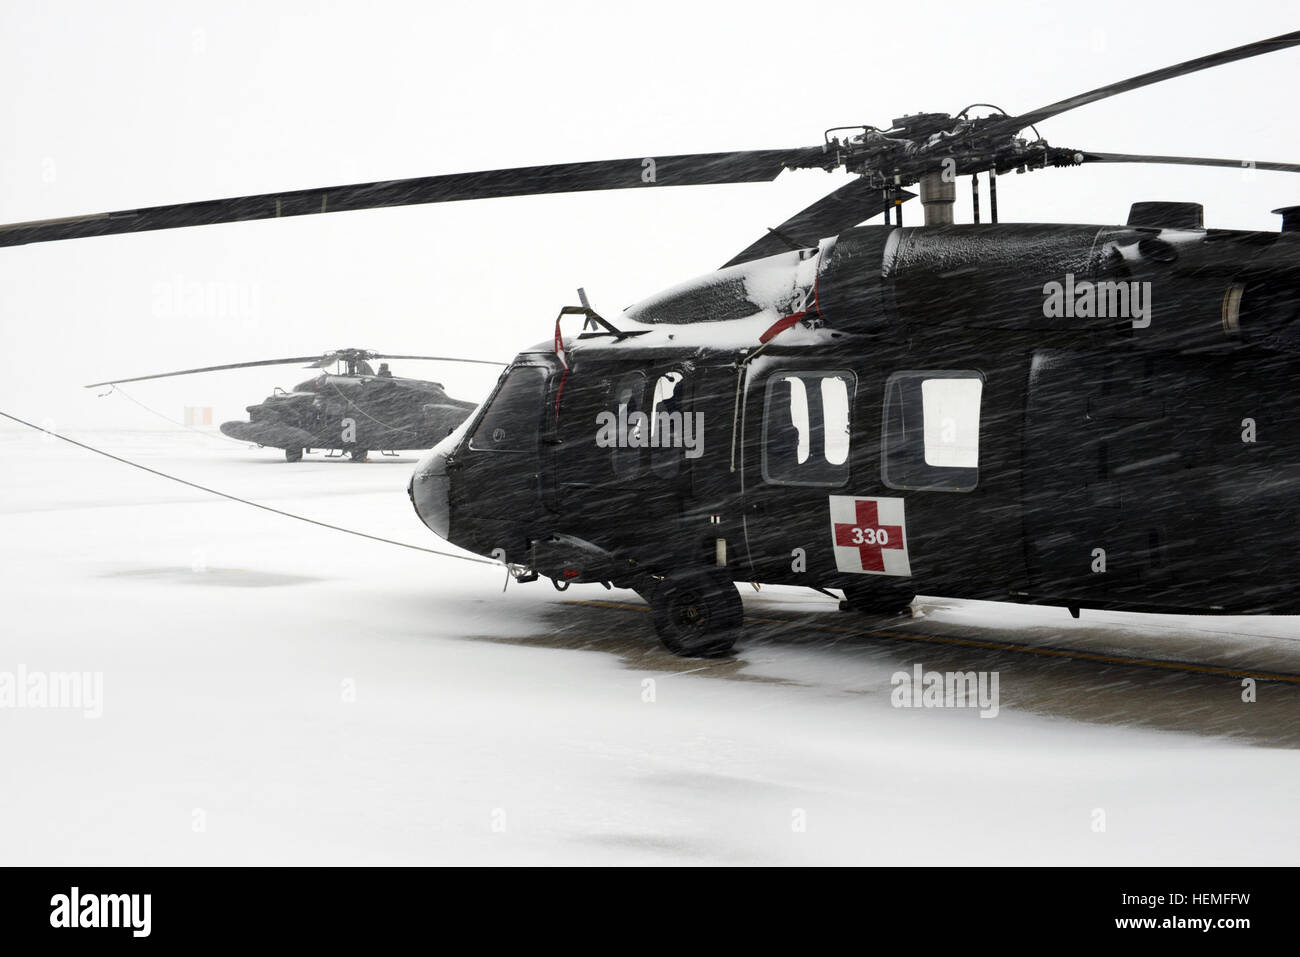 Both of these UH-60 Black Hawks were safe and secure during the blizzard that struck Germany March 12, 2013. (Photo by Dee Crawford, VI Specialist, TSC Wiesbaden) UH-60s in a blizzard 120313-A-Cr252-011 Stock Photo